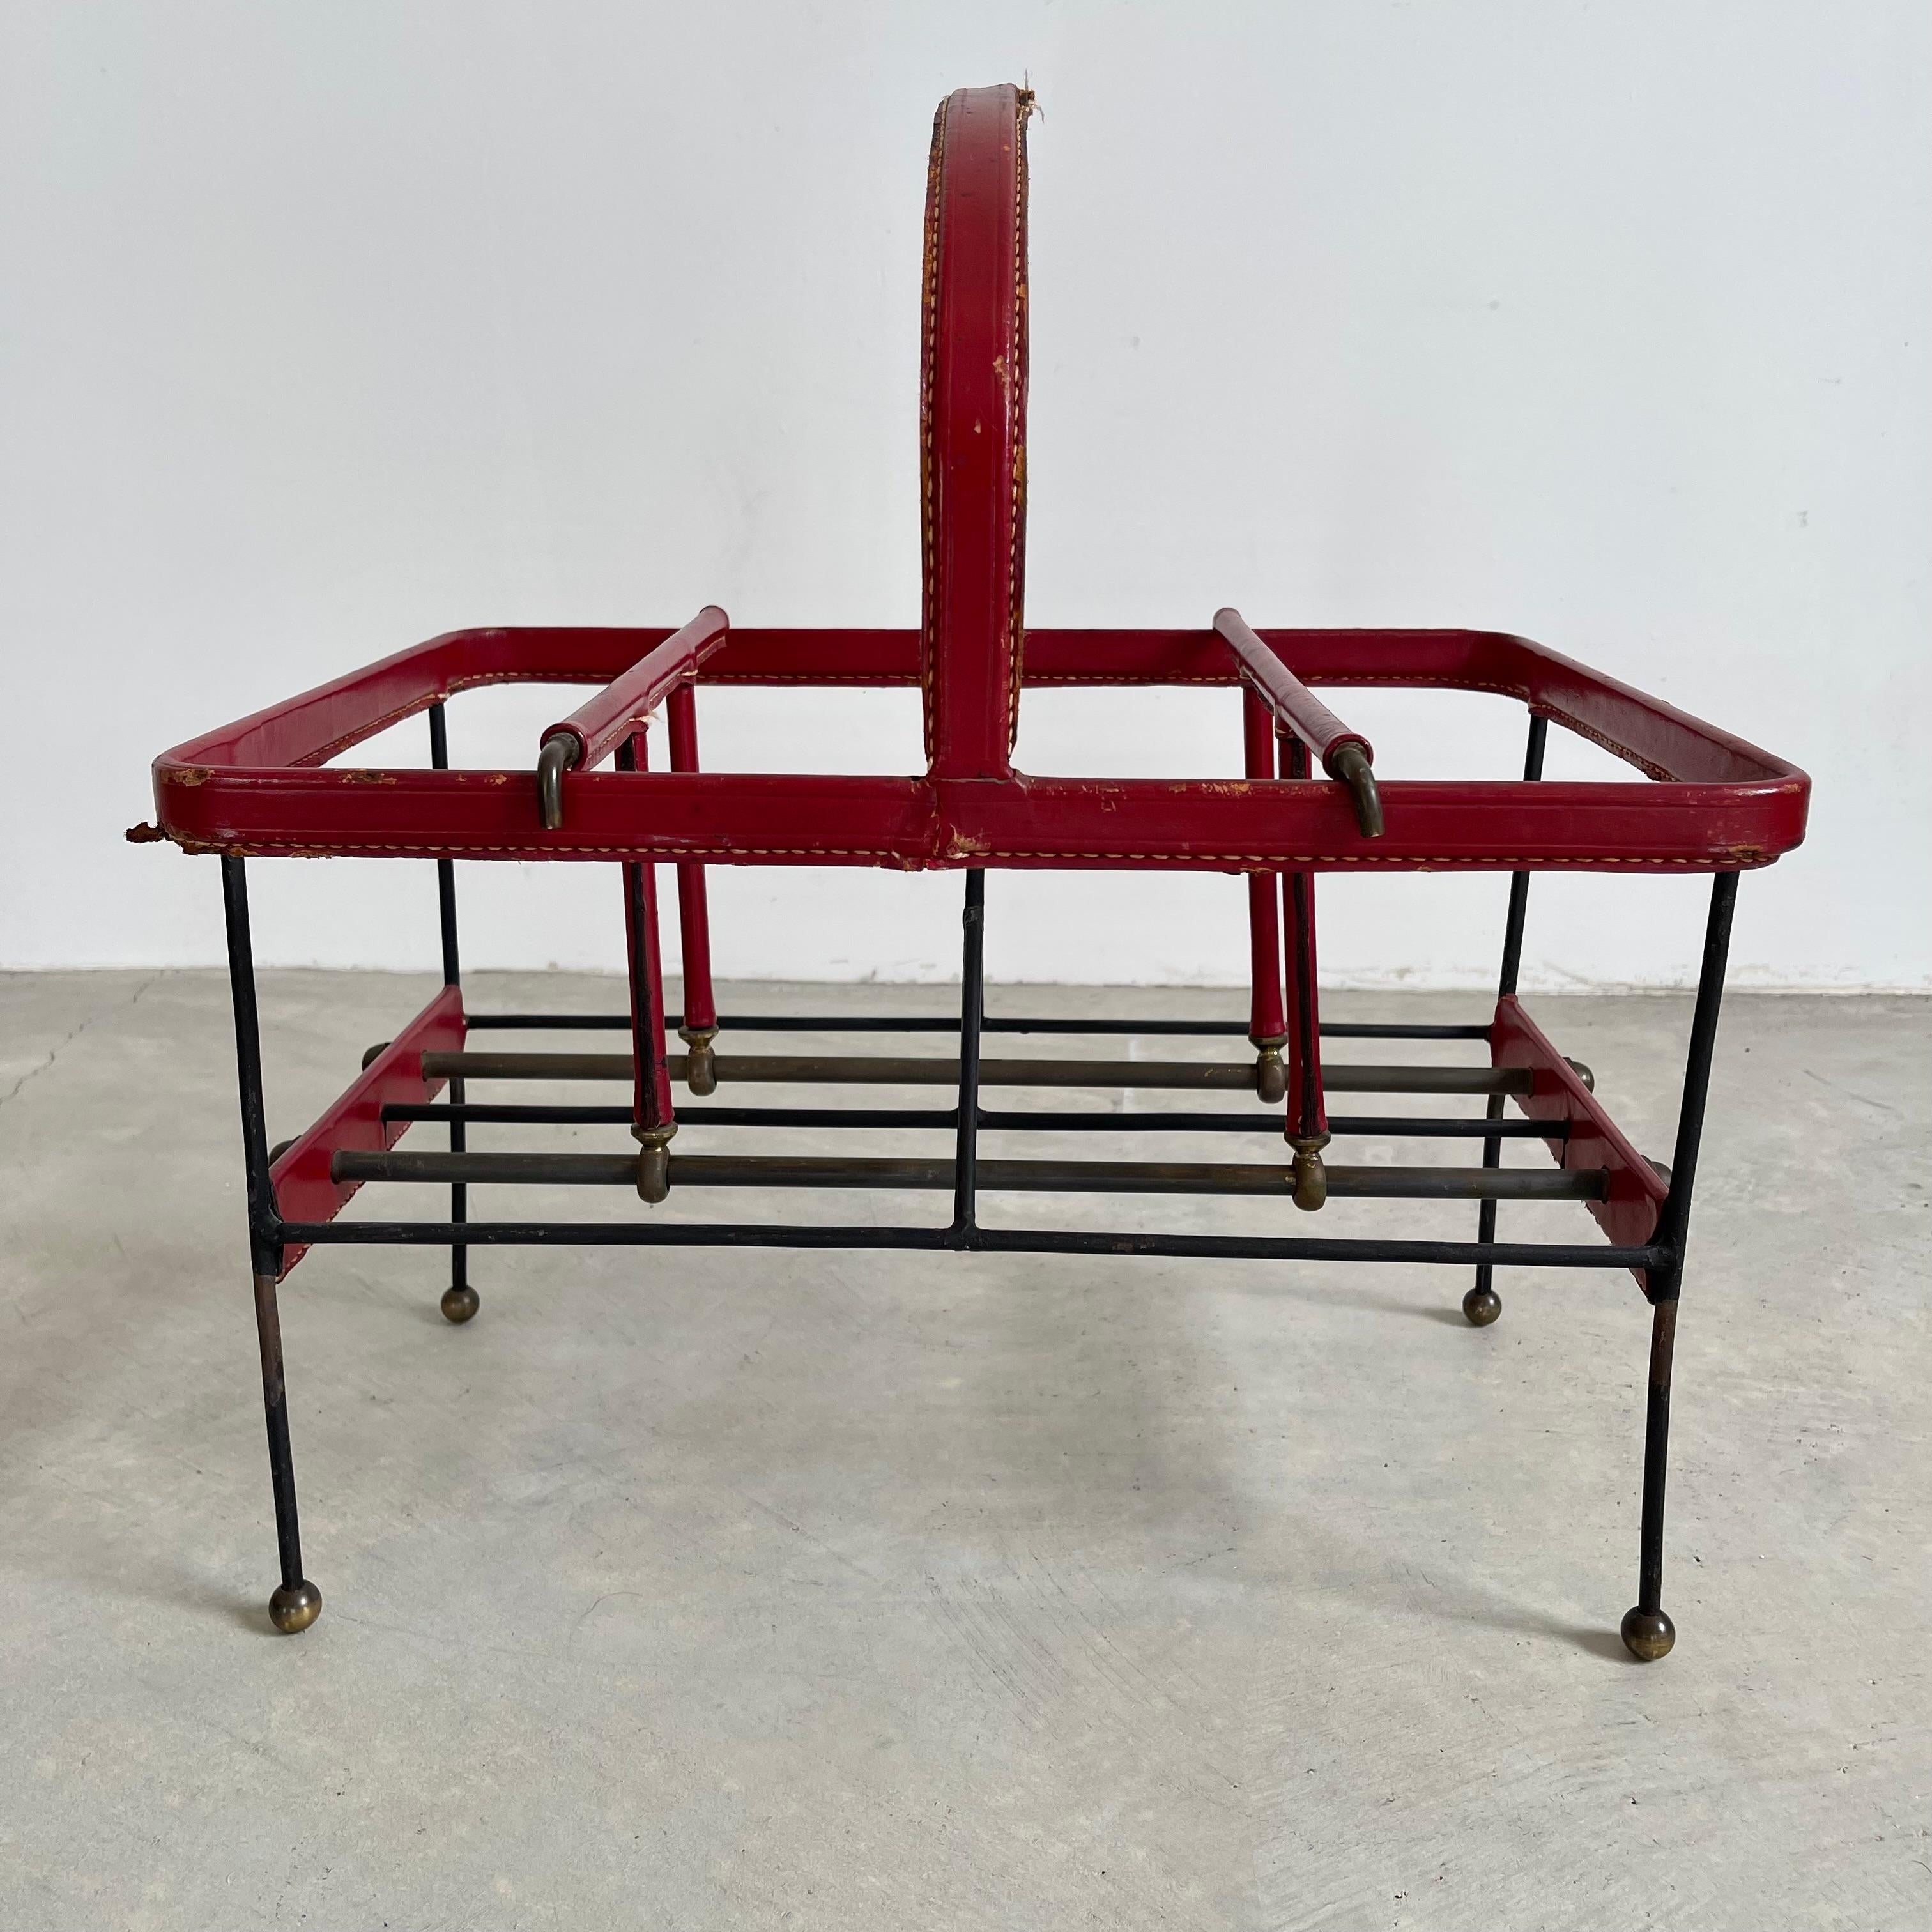 Fantastic leather and metal magazine rack by French designer Jacques Adnet. Thick red leather accents on a metal wire frame with brass ball feet. Perfect piece for storing books or magazines. Basket features adjustable dividers on either side of the